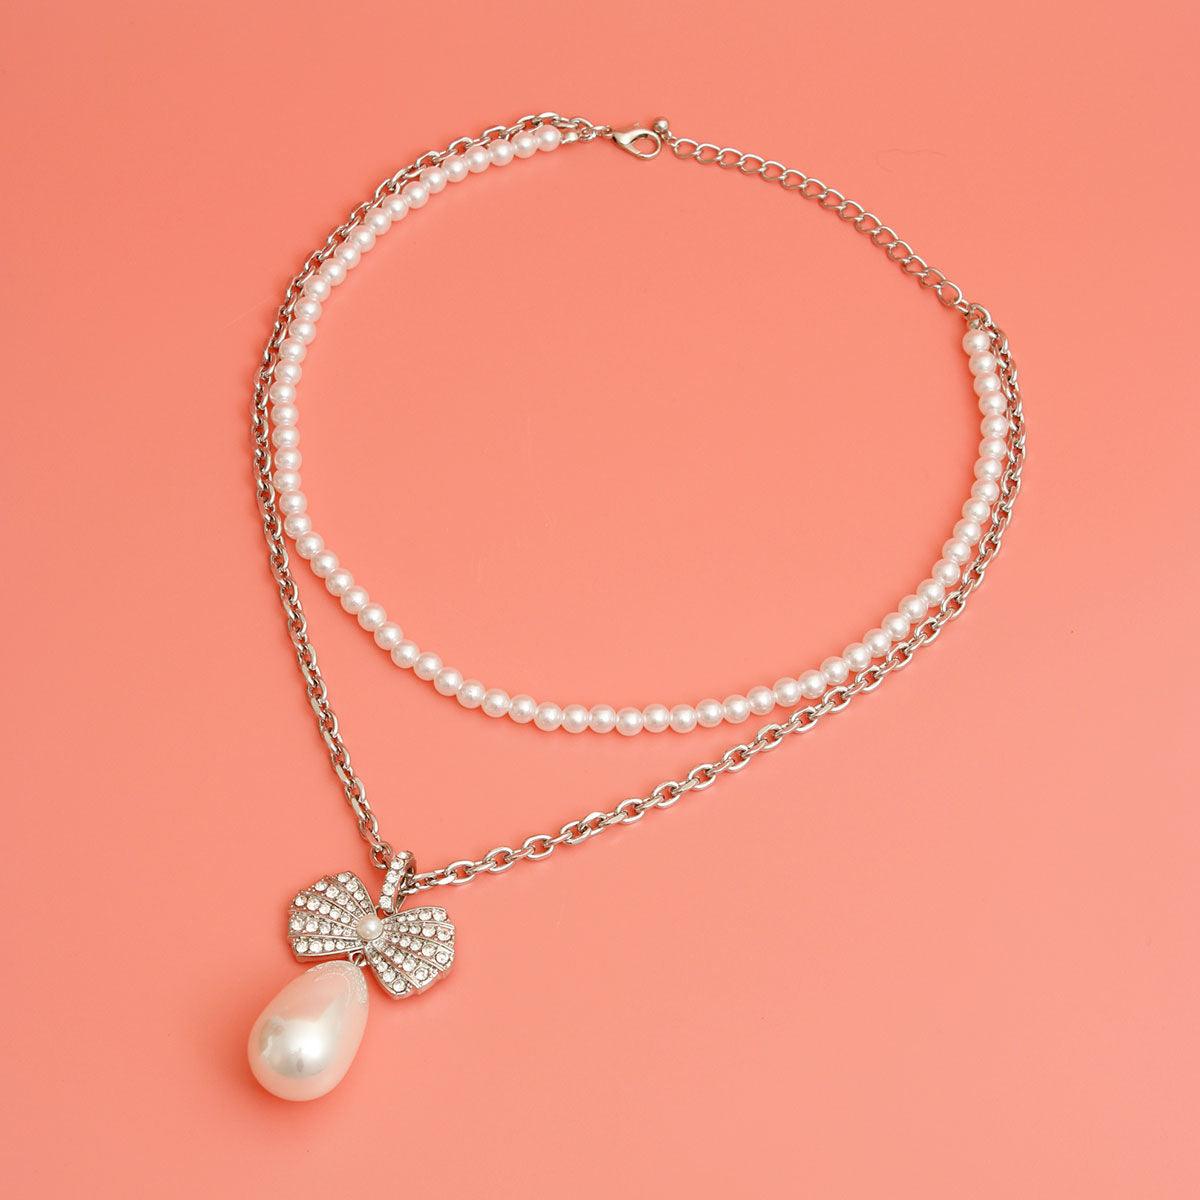 Elegant Silver Bow & Pearl Drop Pendant Necklace: Timeless Elegance for Every Occasion